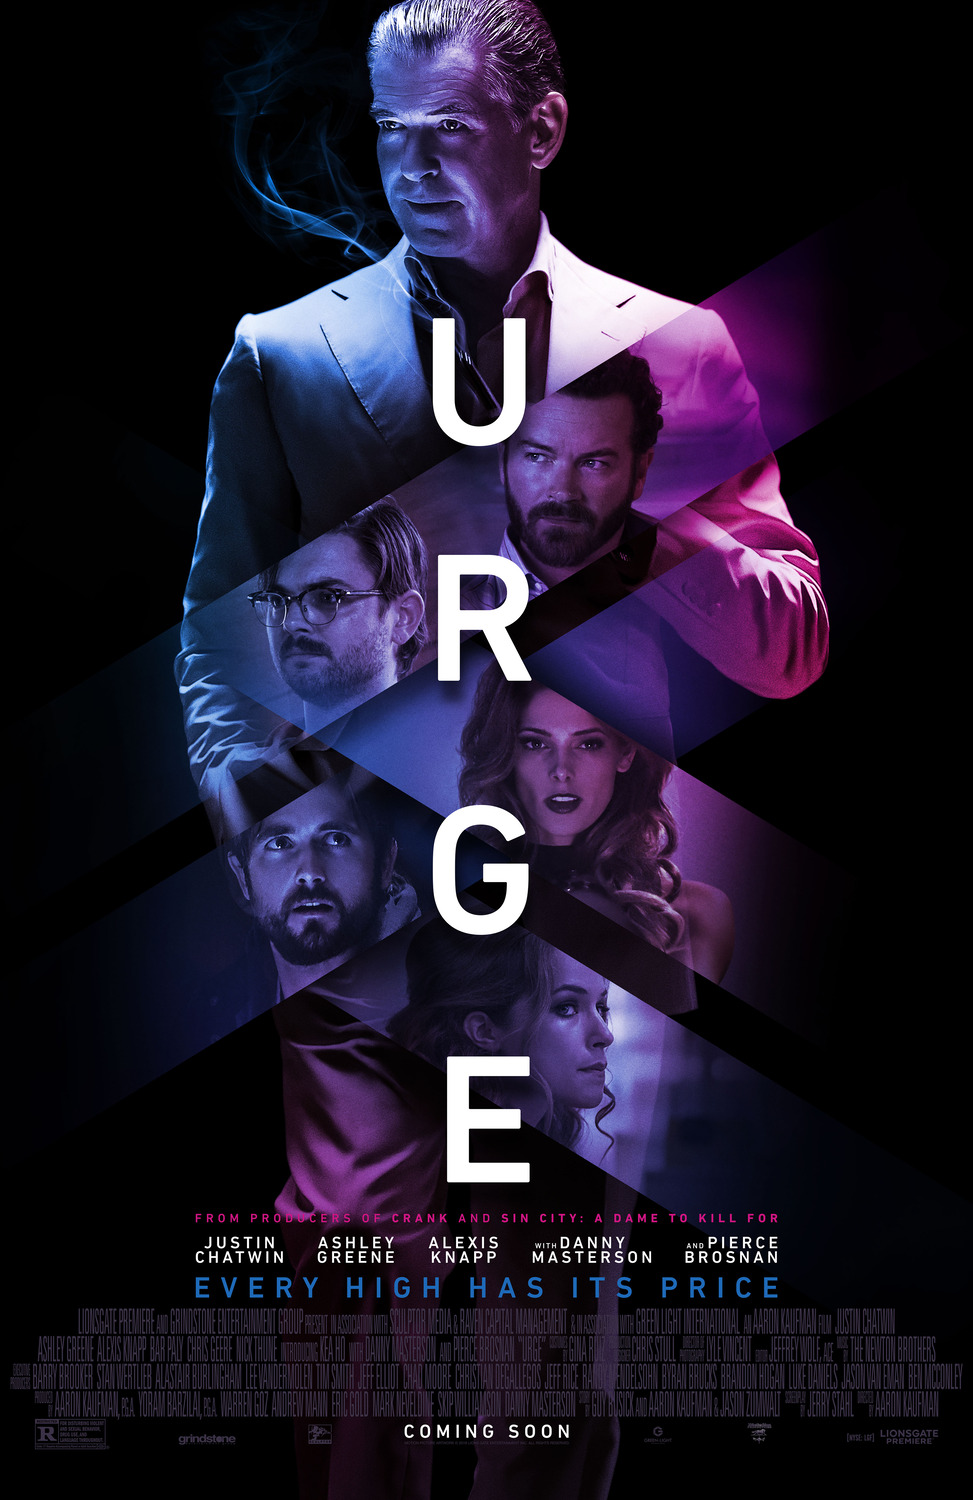 Extra Large Movie Poster Image for Urge 